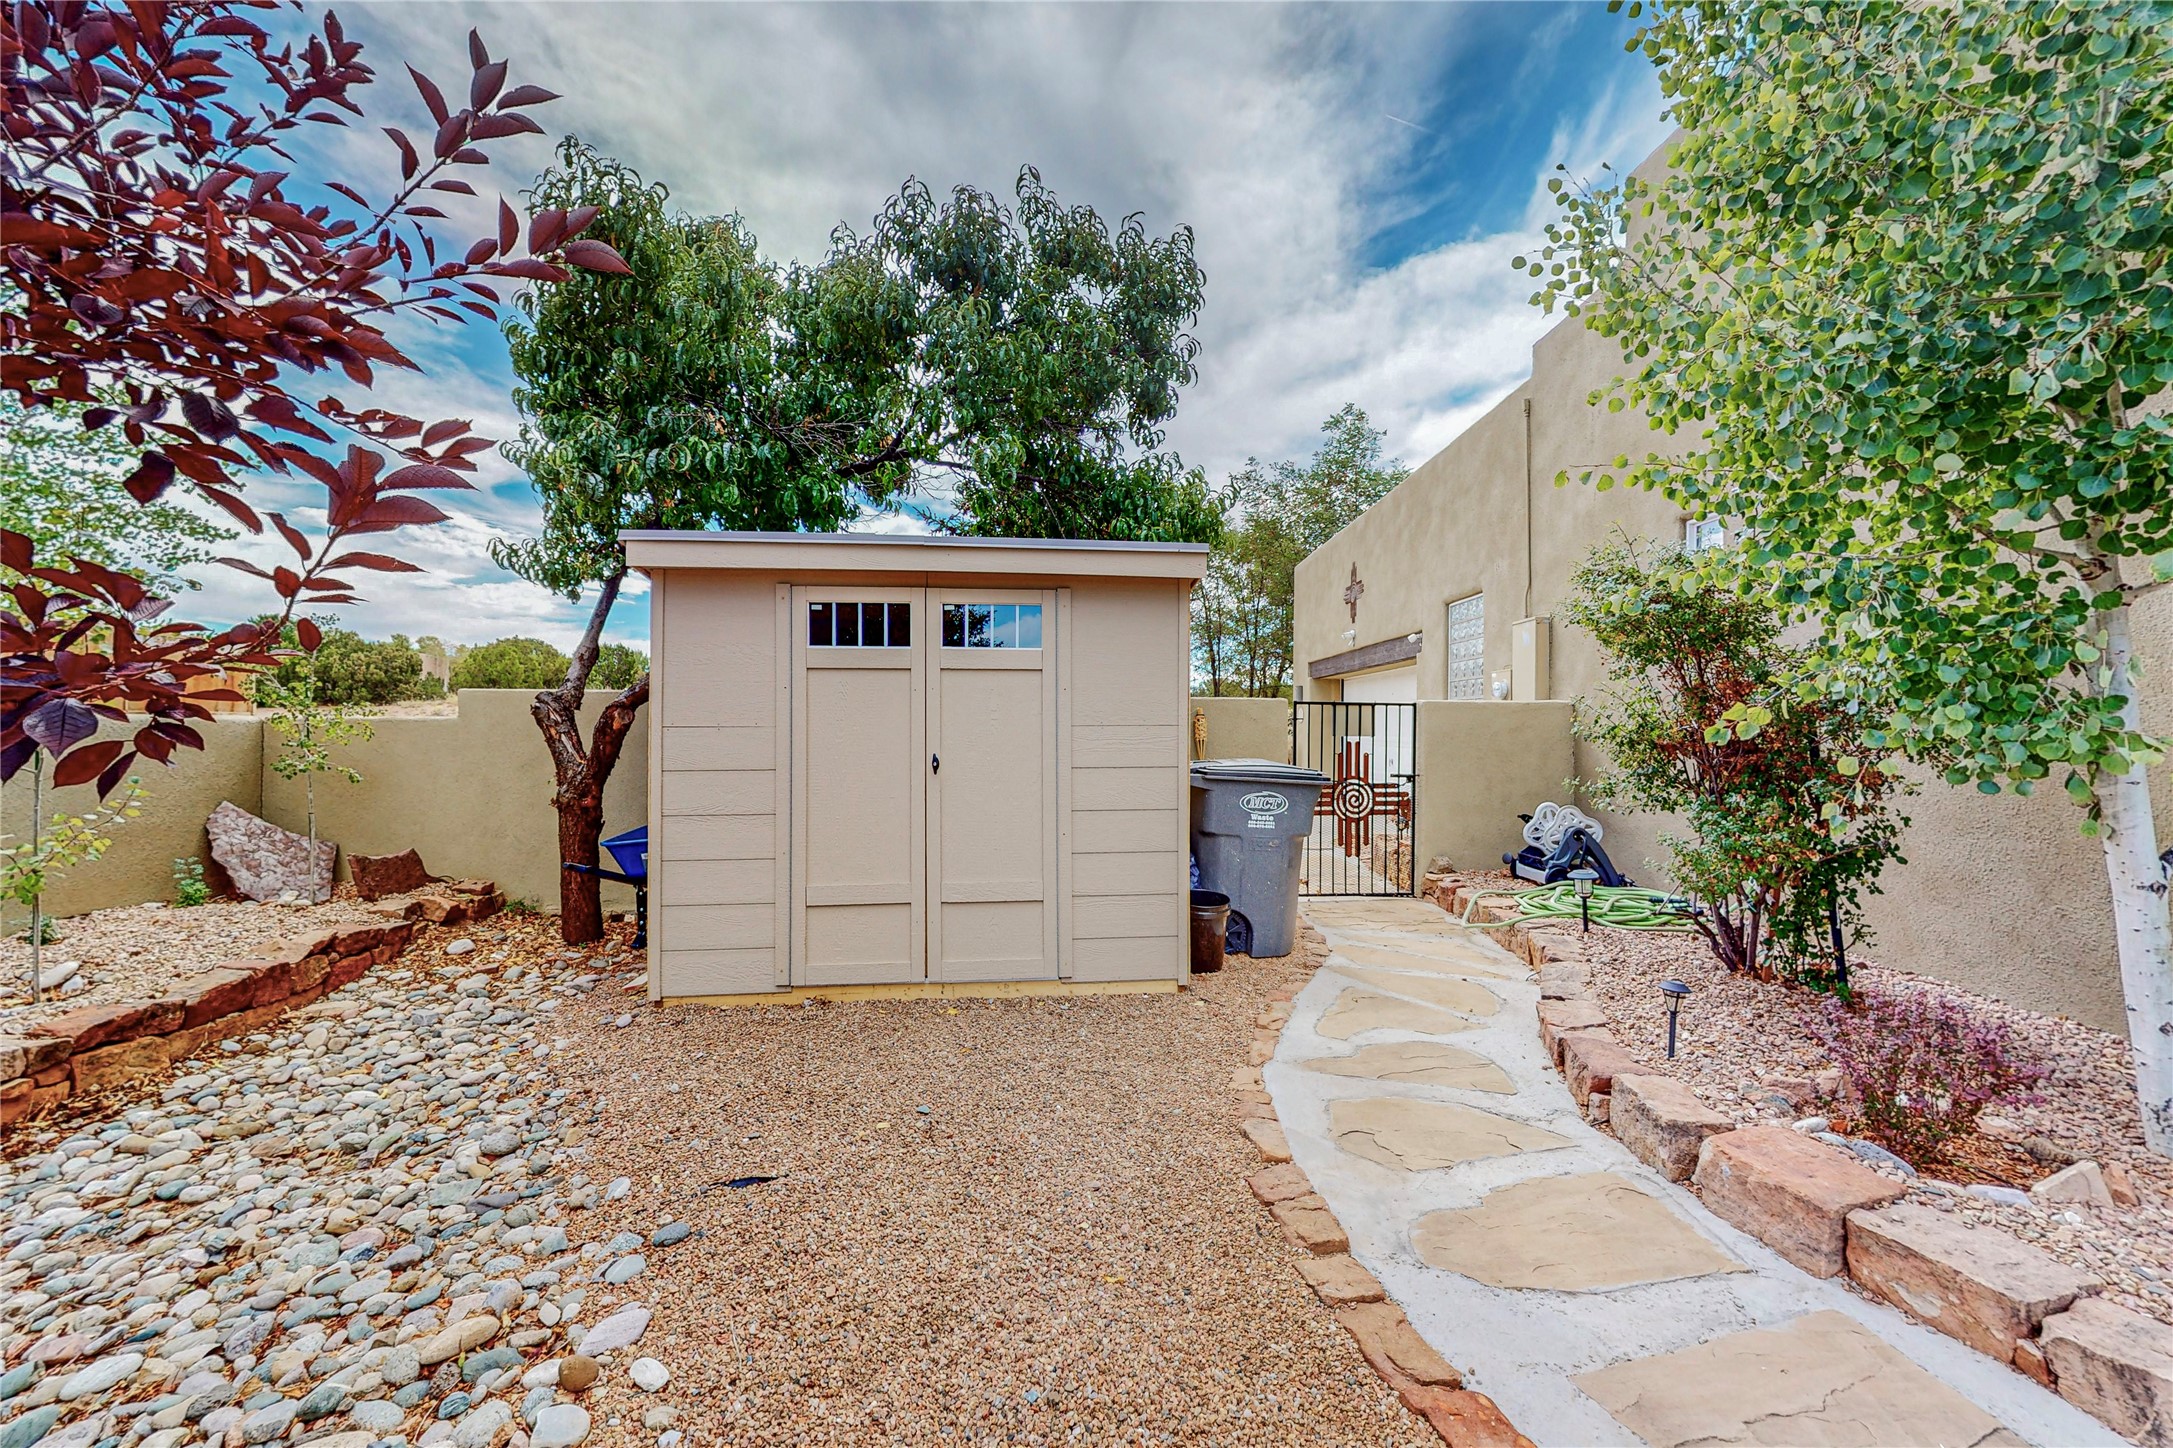 19 Deans B, Santa Fe, New Mexico 87508, 3 Bedrooms Bedrooms, ,2 BathroomsBathrooms,Residential,For Sale,19 Deans B,202400334